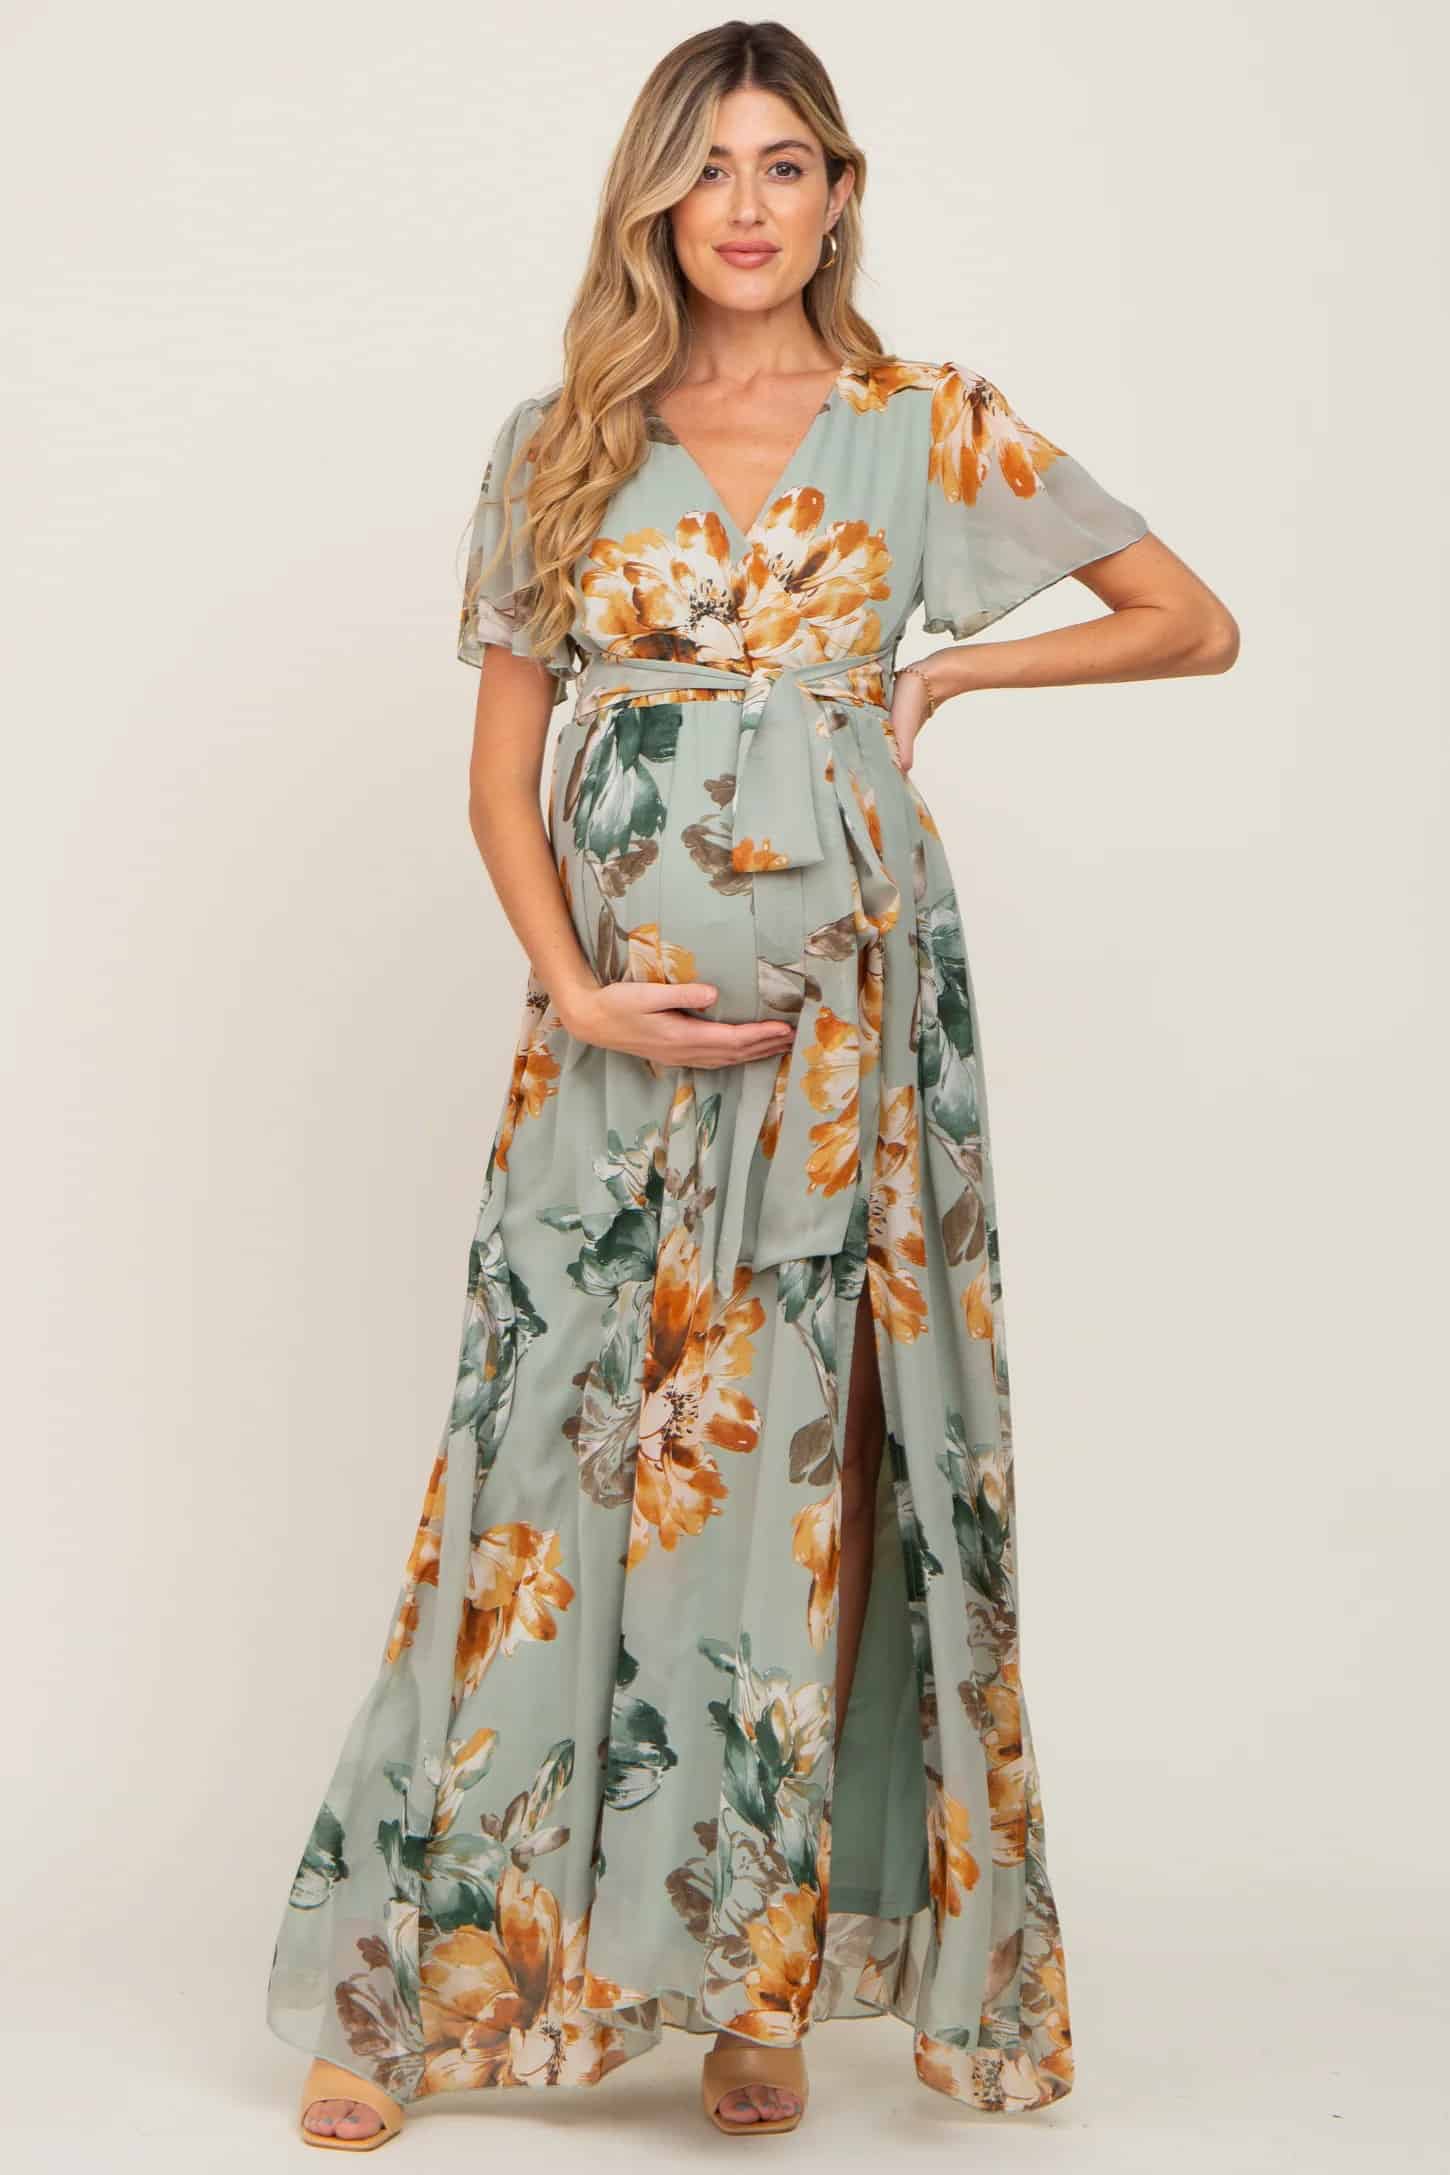 The Most Stylish Maternity Dresses for Wedding Guests - Dress for the ...